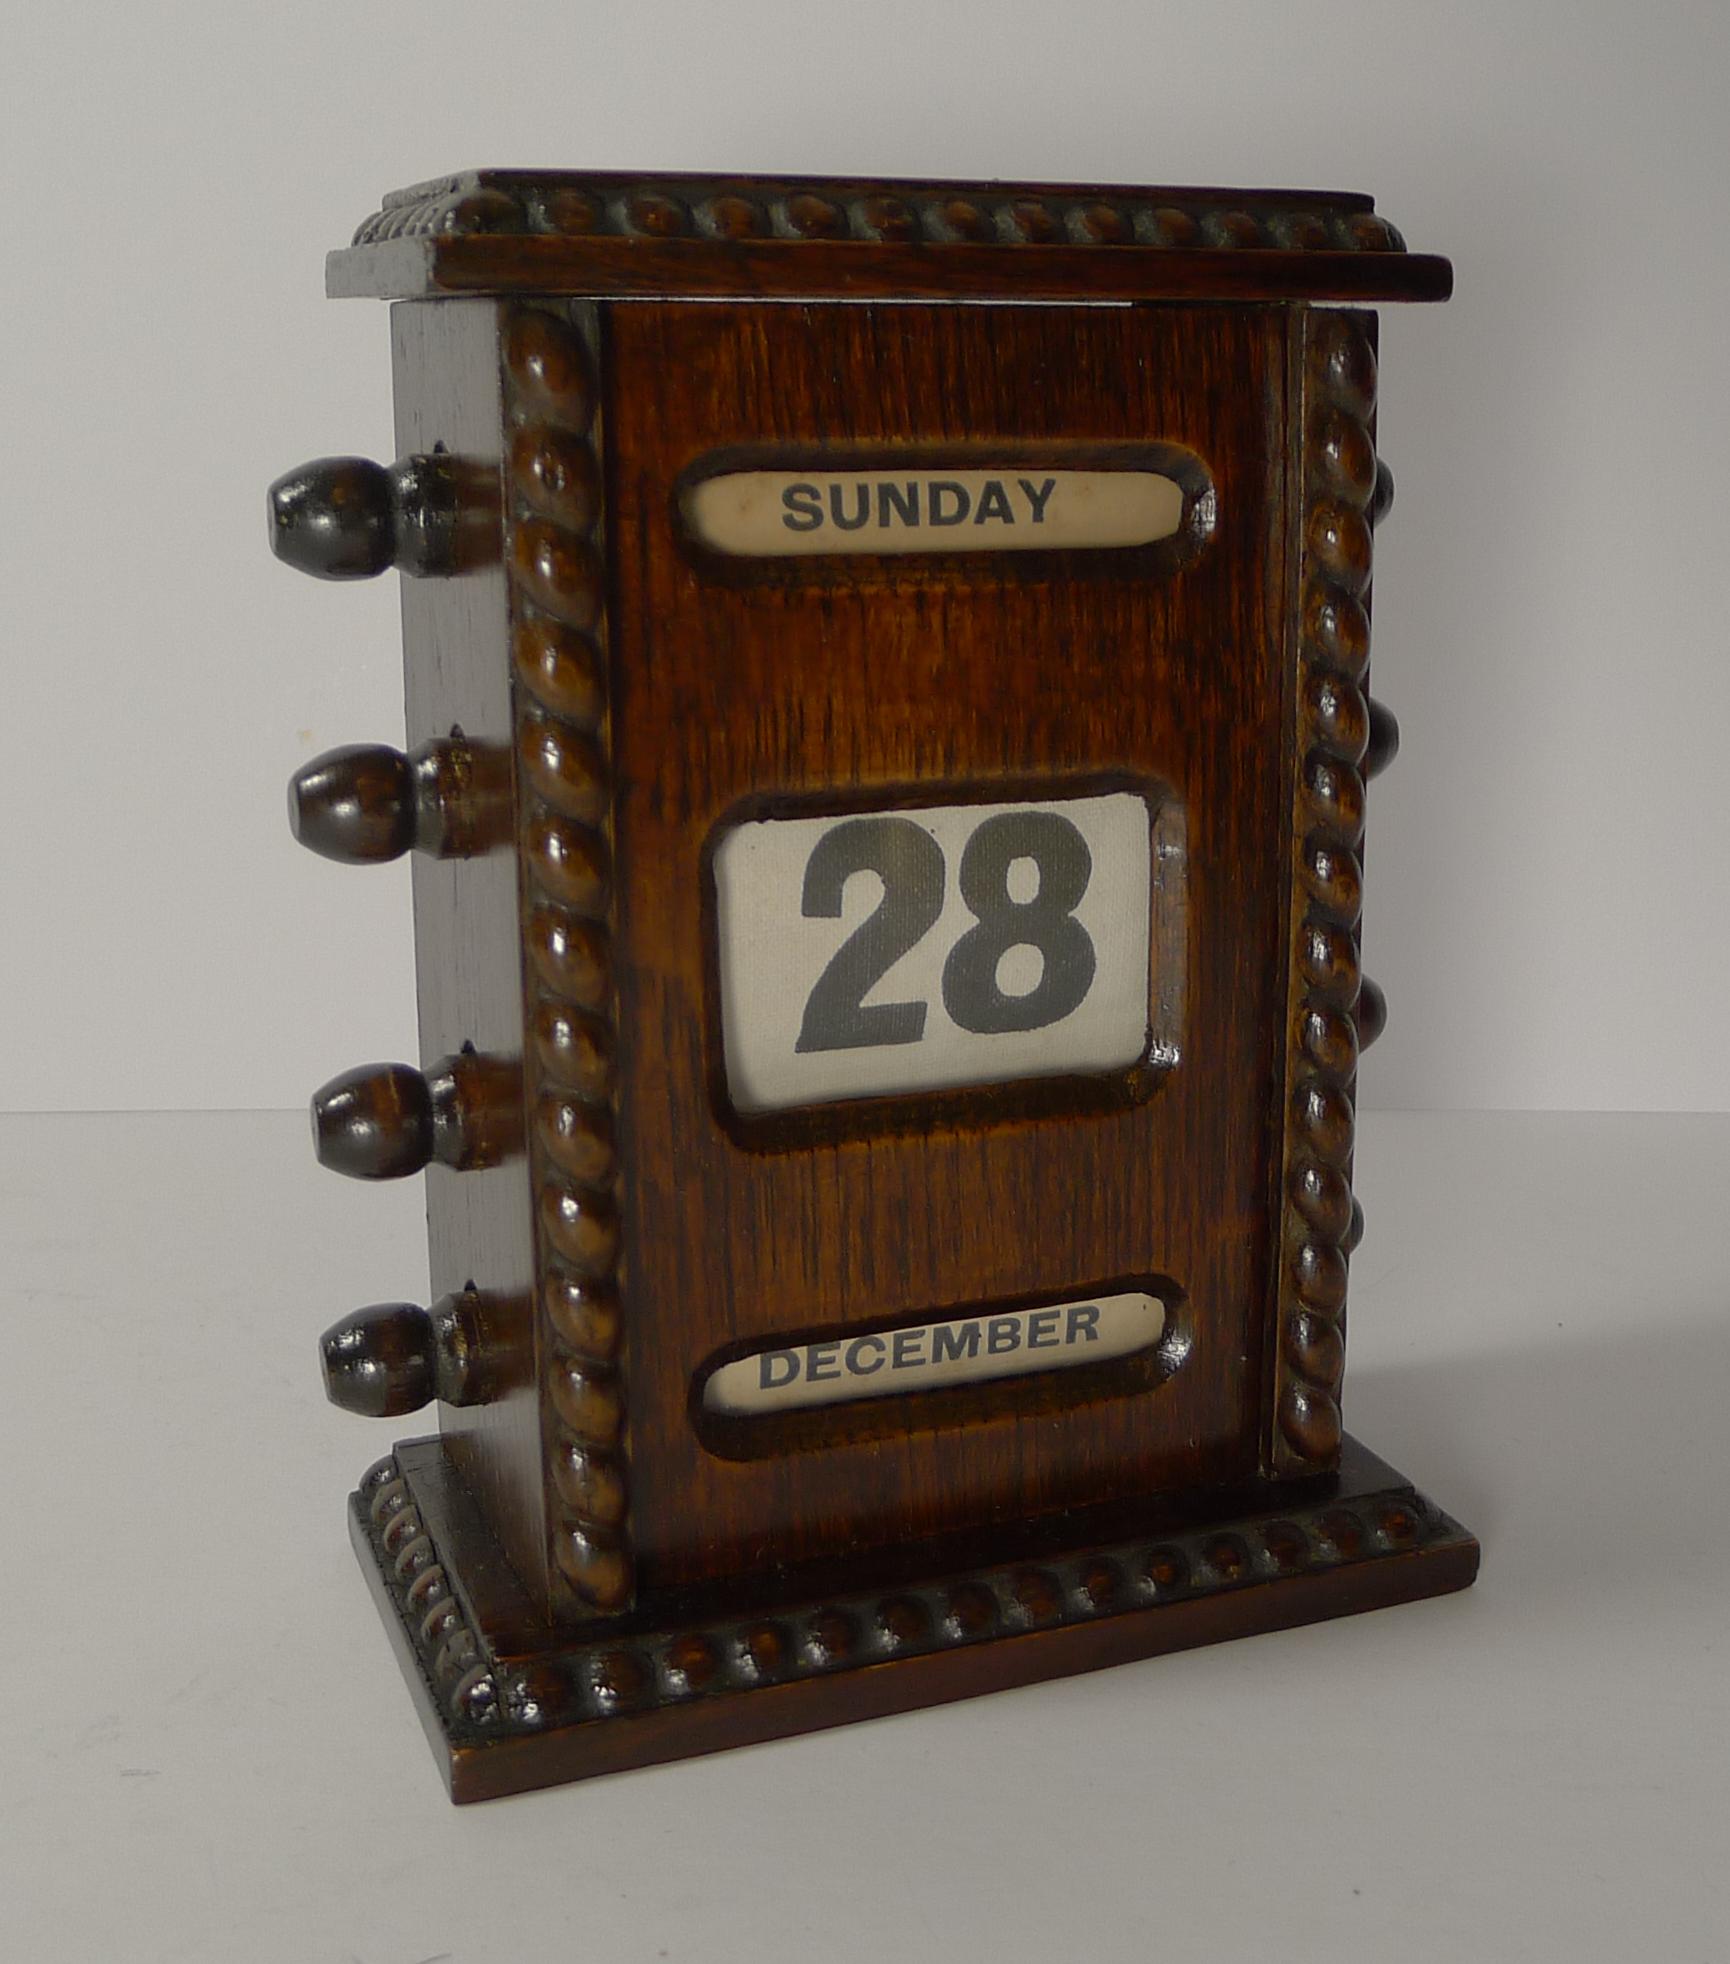 A handsome desk-top wooden perpetual calendar made from solid English oak with some nice carved detail.

The keys to the sides are used to forward and return the day, date and month rolls behind the glazed apertures.

Dating to the Edwardian